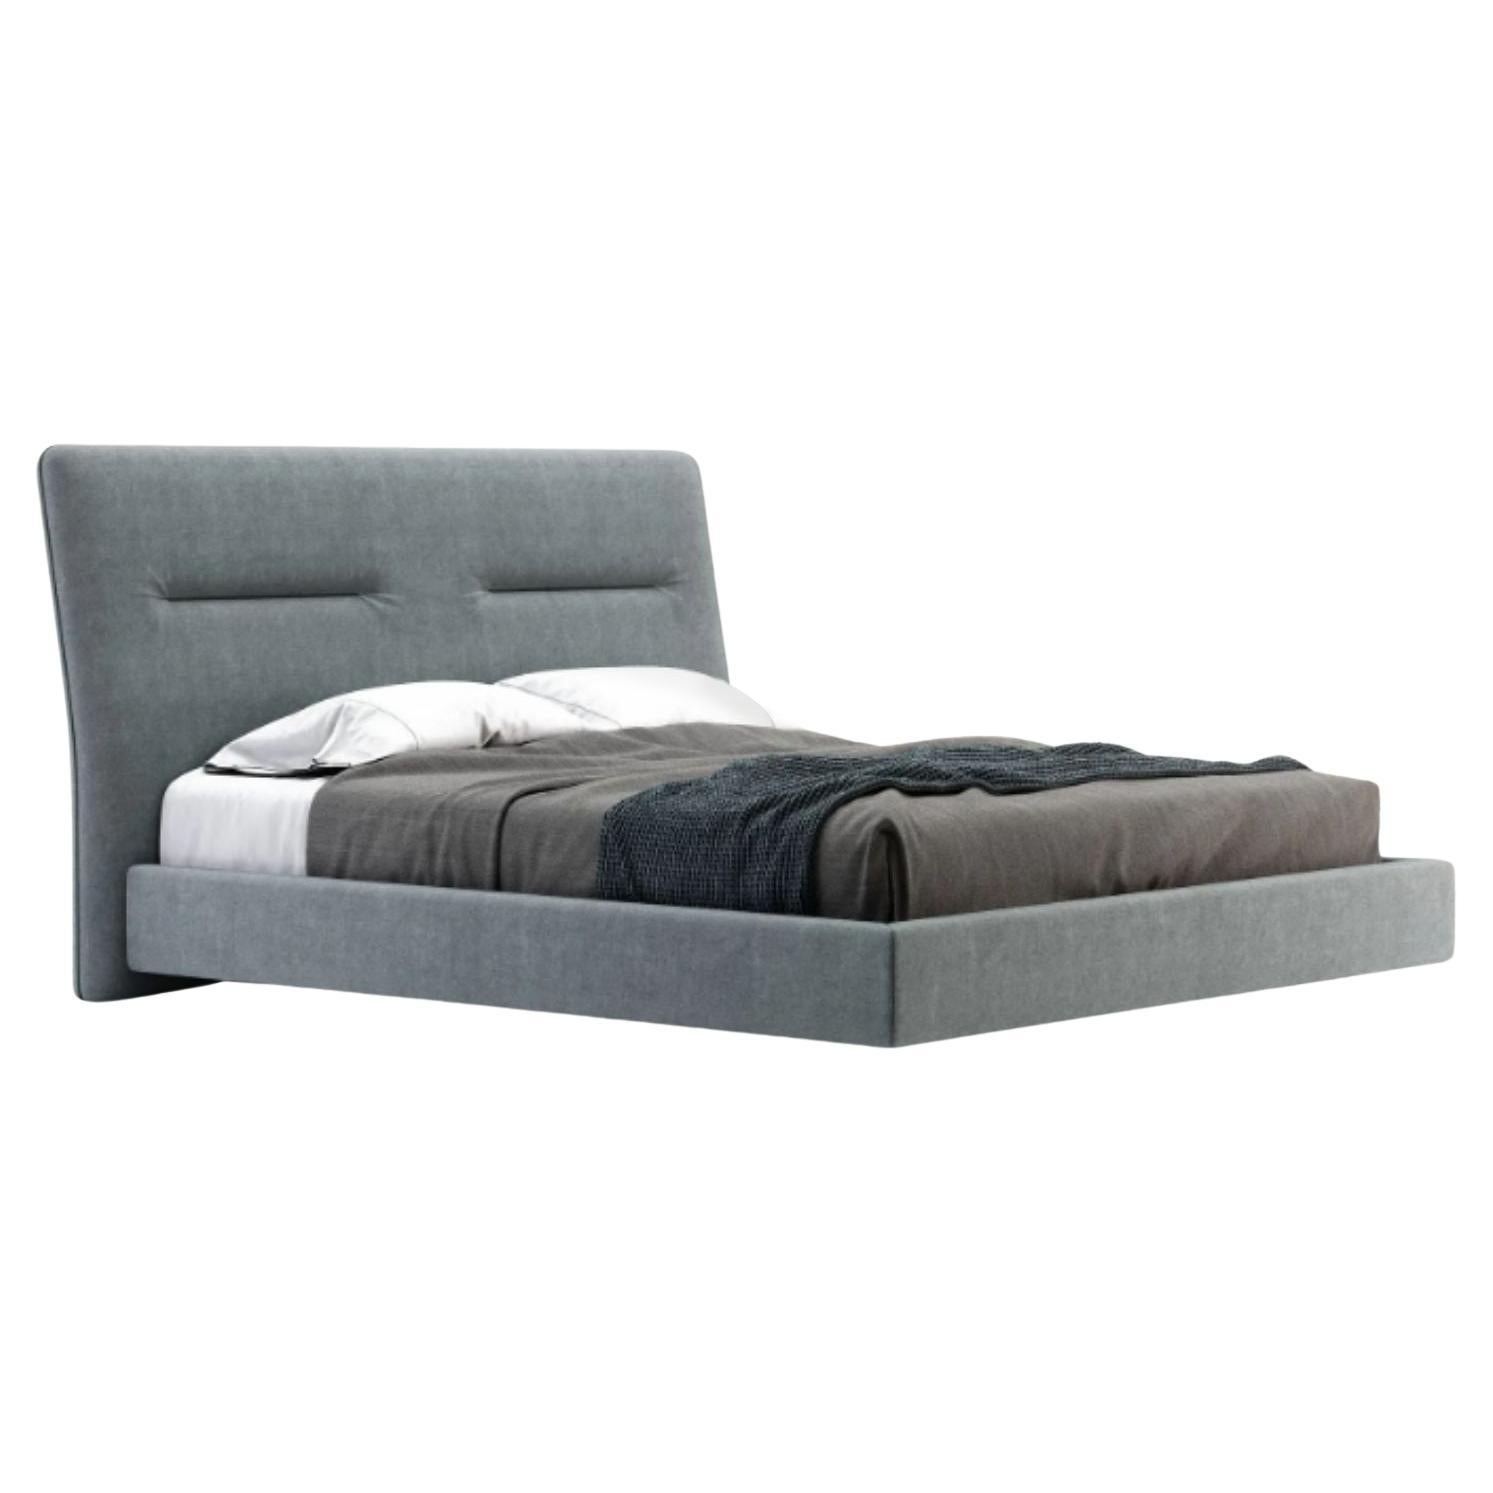 Queen Size Helen Bed by Domkapa For Sale